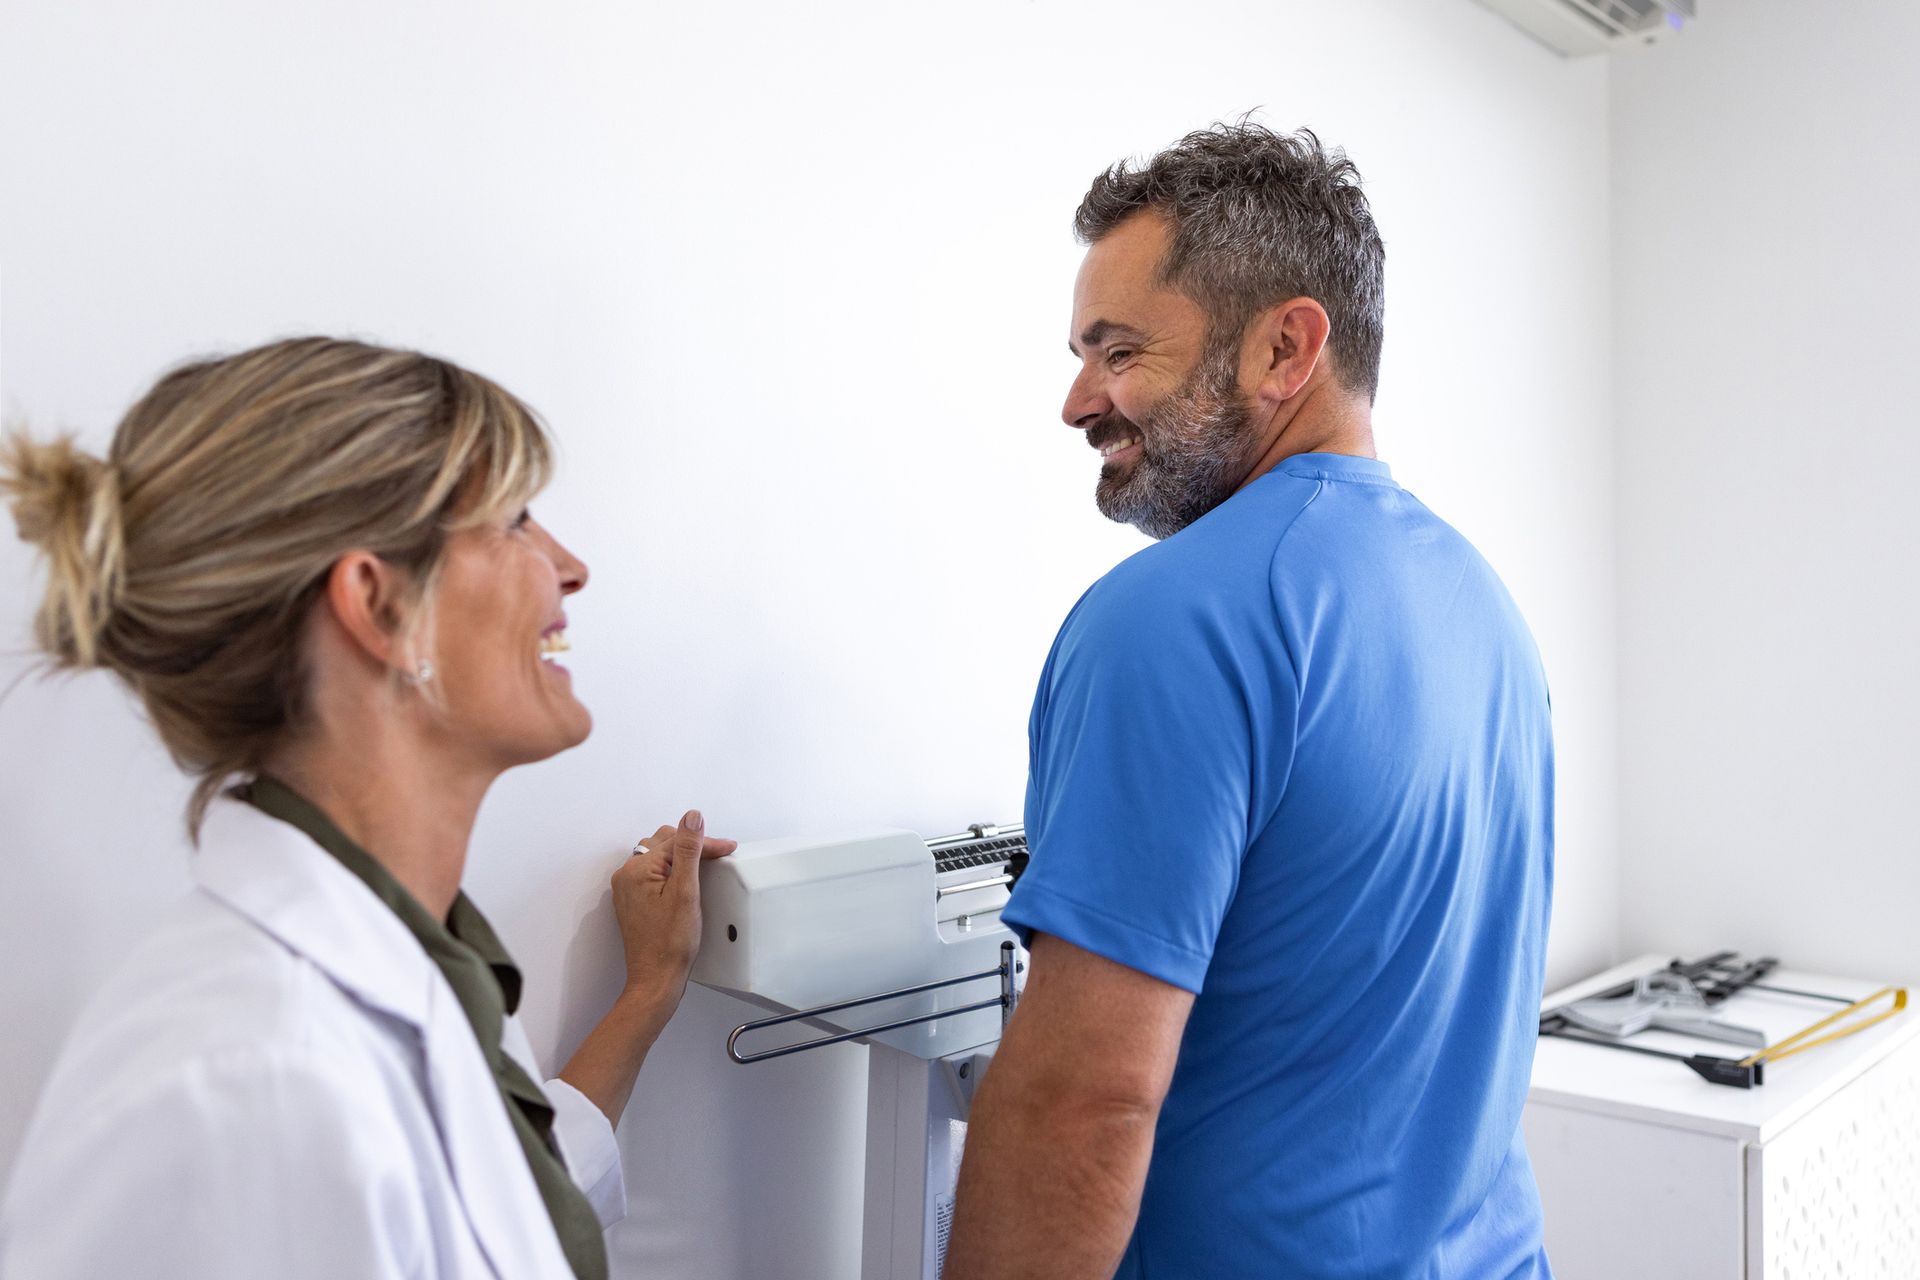 A doctor is talking to a patient who is standing in front of a scale.